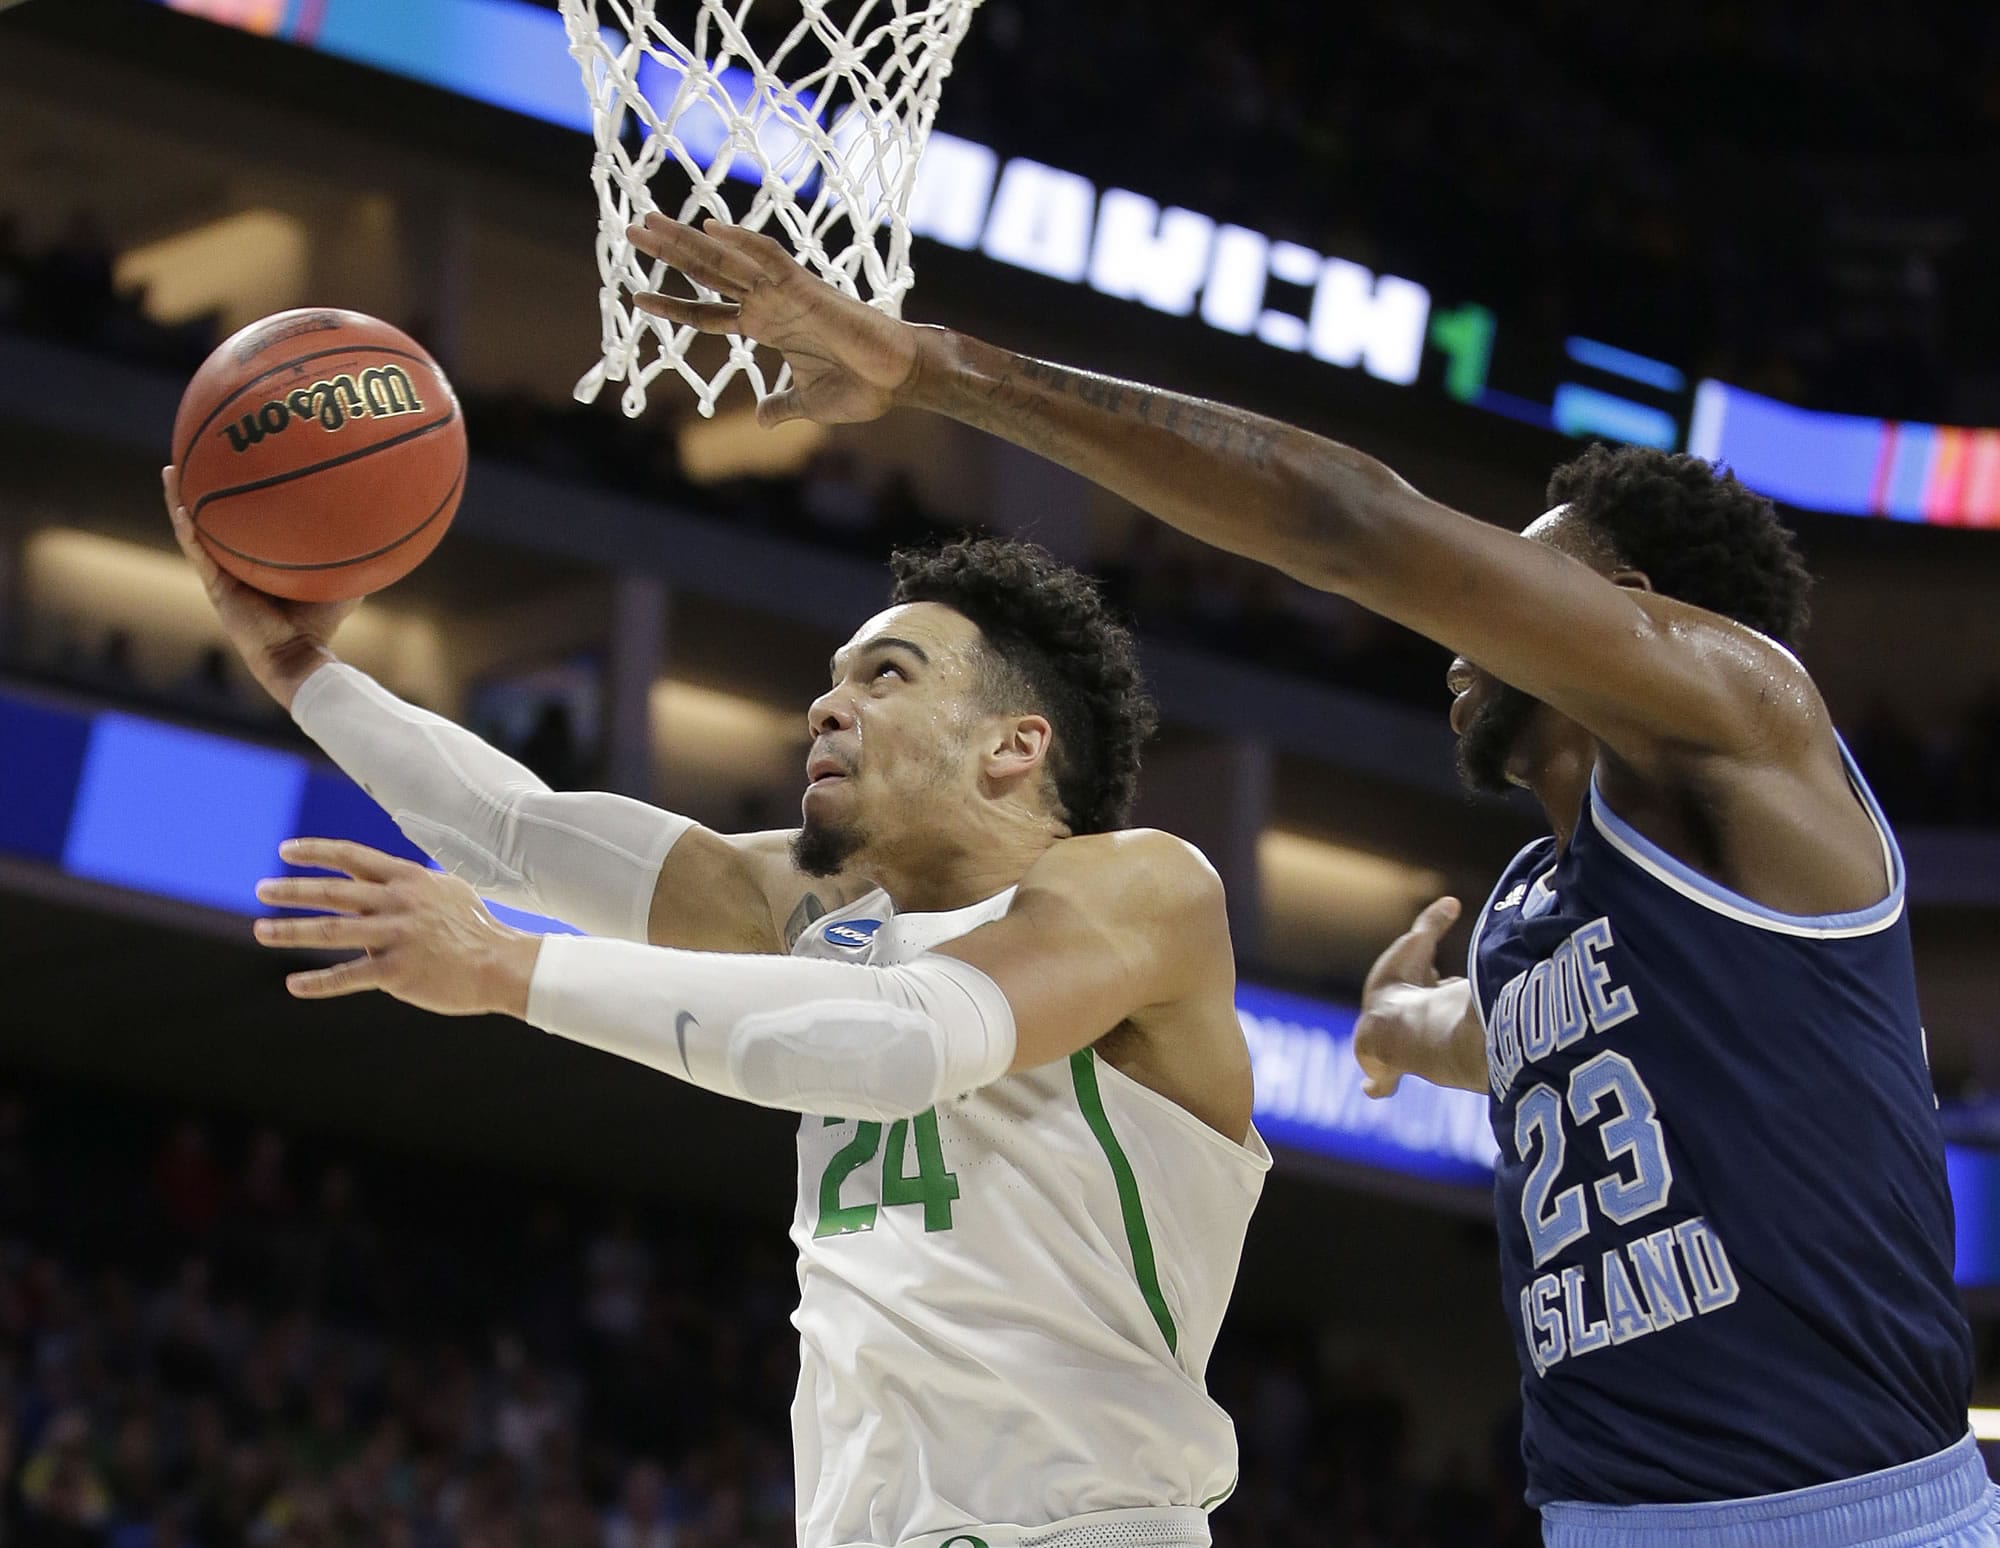 Oregon Ducks, Dillon Brooks, left, goes to the basket against Rhode Island forward Kuran Iverson during the first half of a second-round game of the NCAA men's college basketball tournament in Sacramento, Calif., Sunday, March 19, 2017.